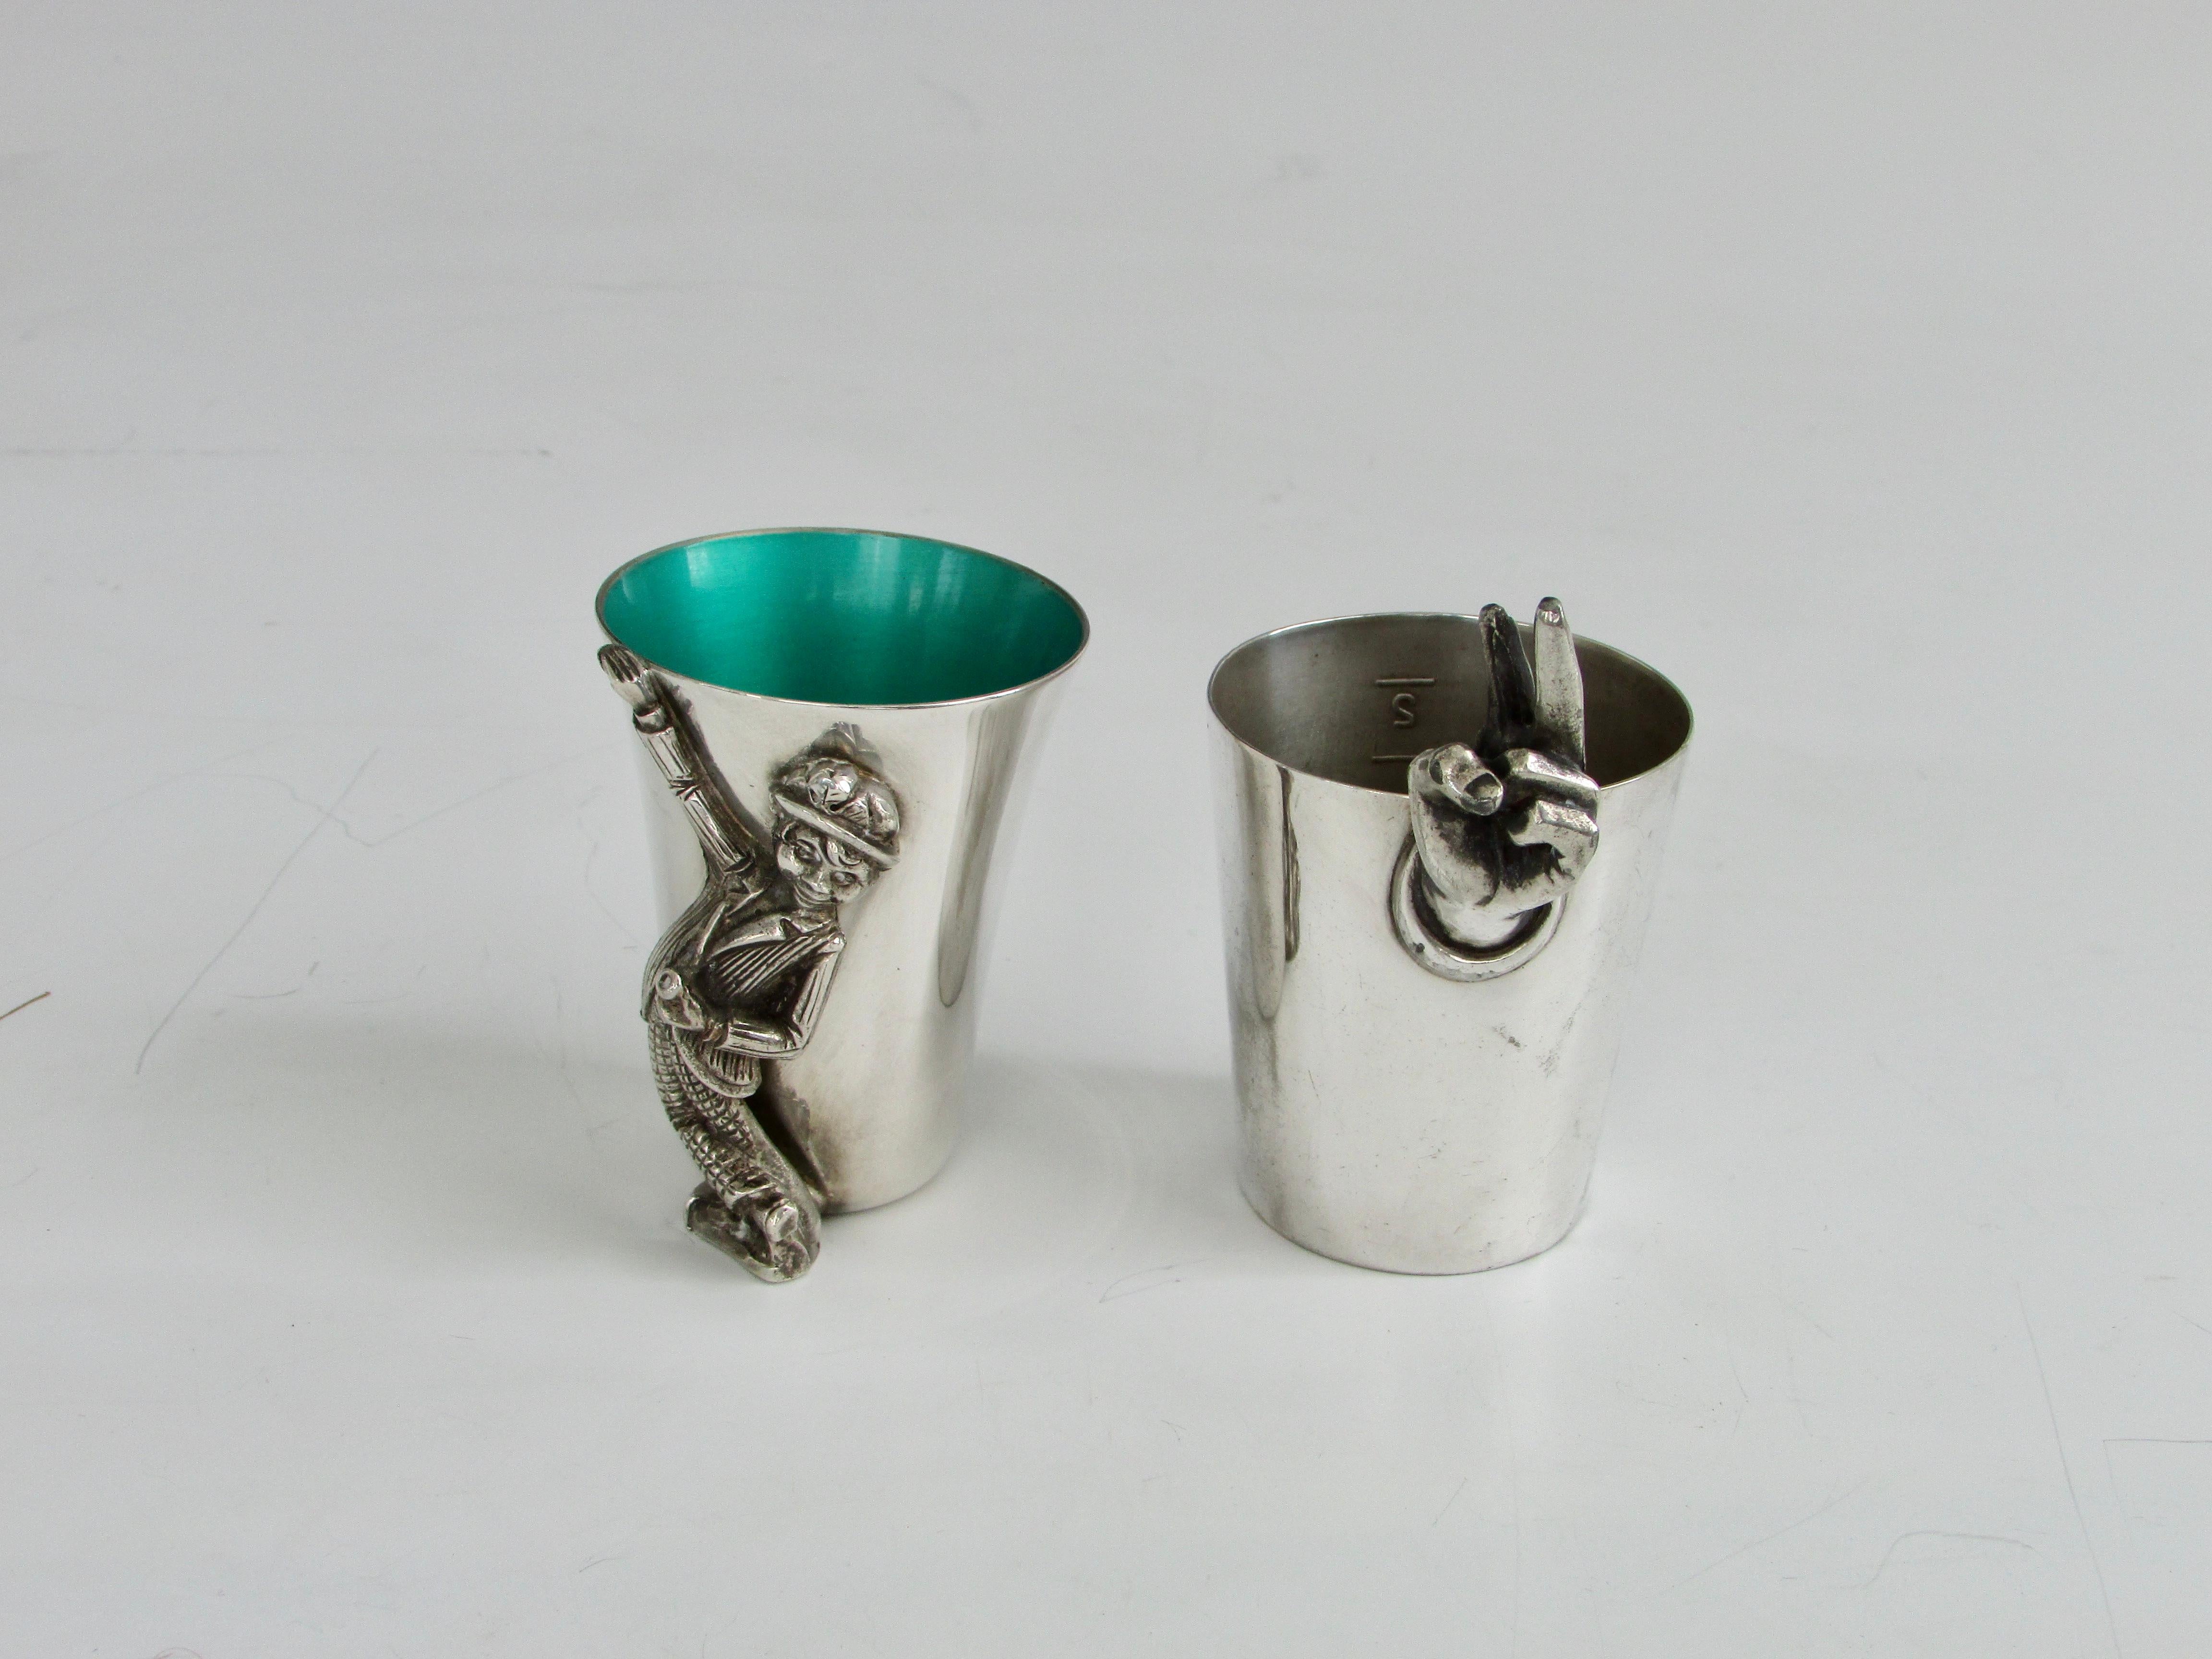 Two fingers please. Shot measure silver plate cups. One with enamel interior by Reed and Barton. With happy drunk figure. The second by Napier. Showing two fingers as measure. Priced separately.